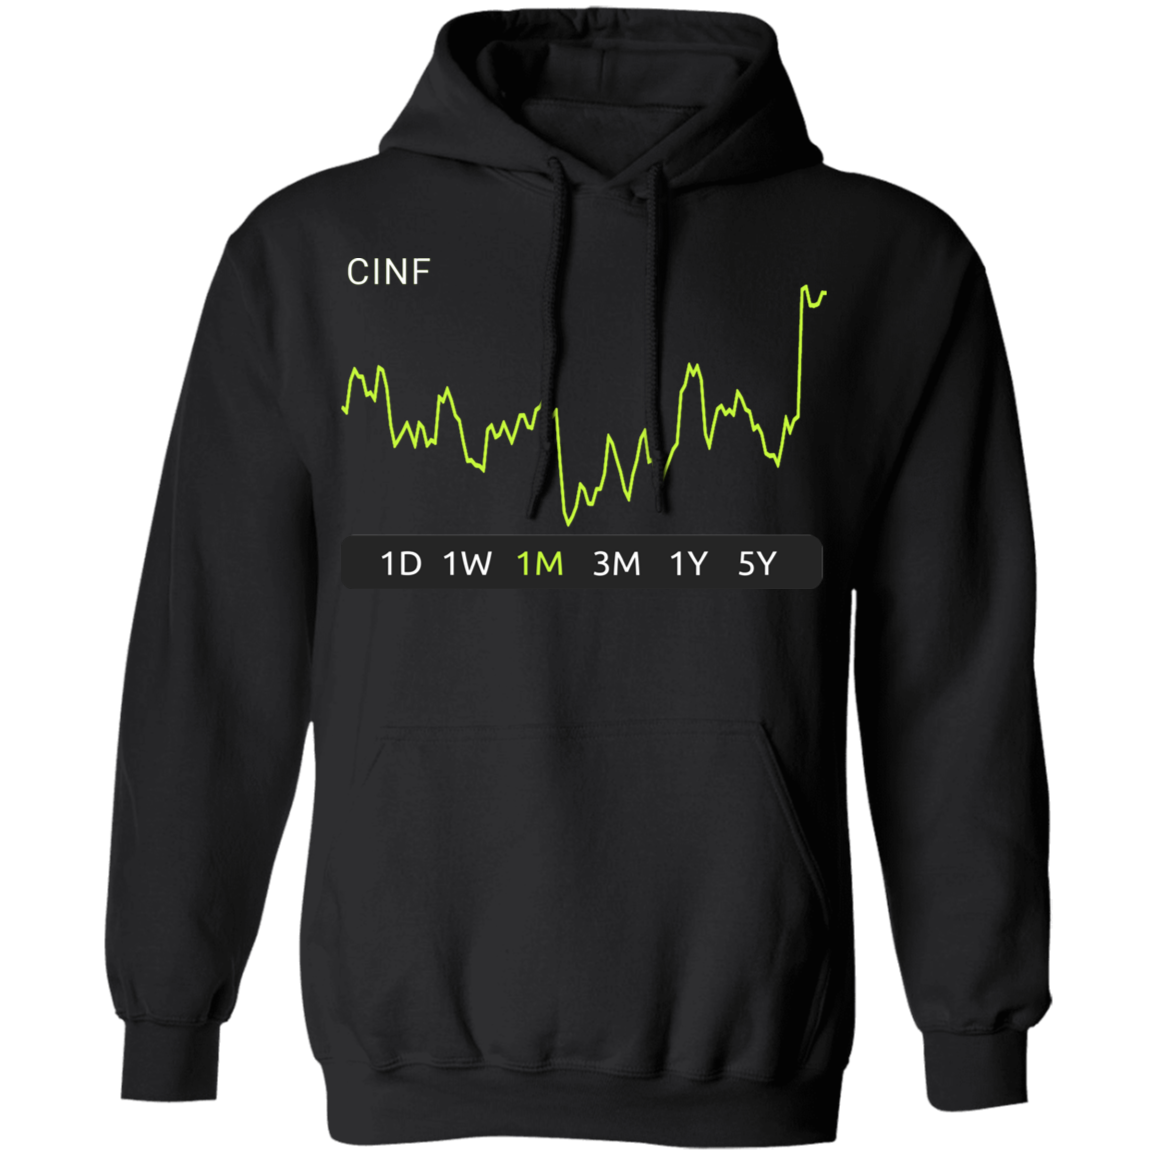 CINF Stock 1m Pullover Hoodie